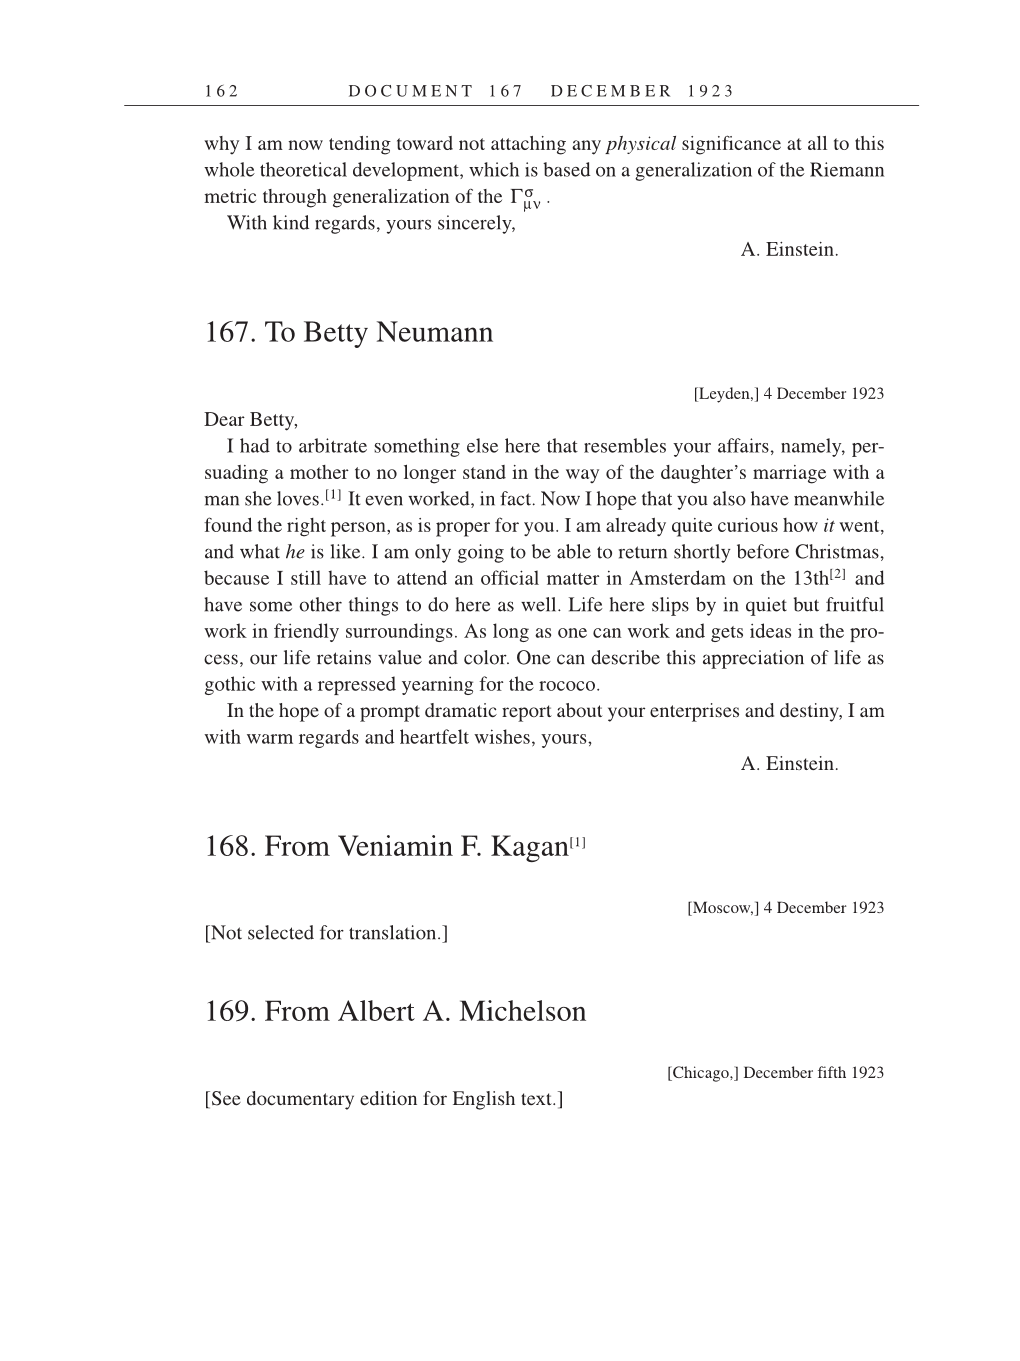 Volume 14: The Berlin Years: Writings & Correspondence, April 1923-May 1925 (English Translation Supplement) page 162